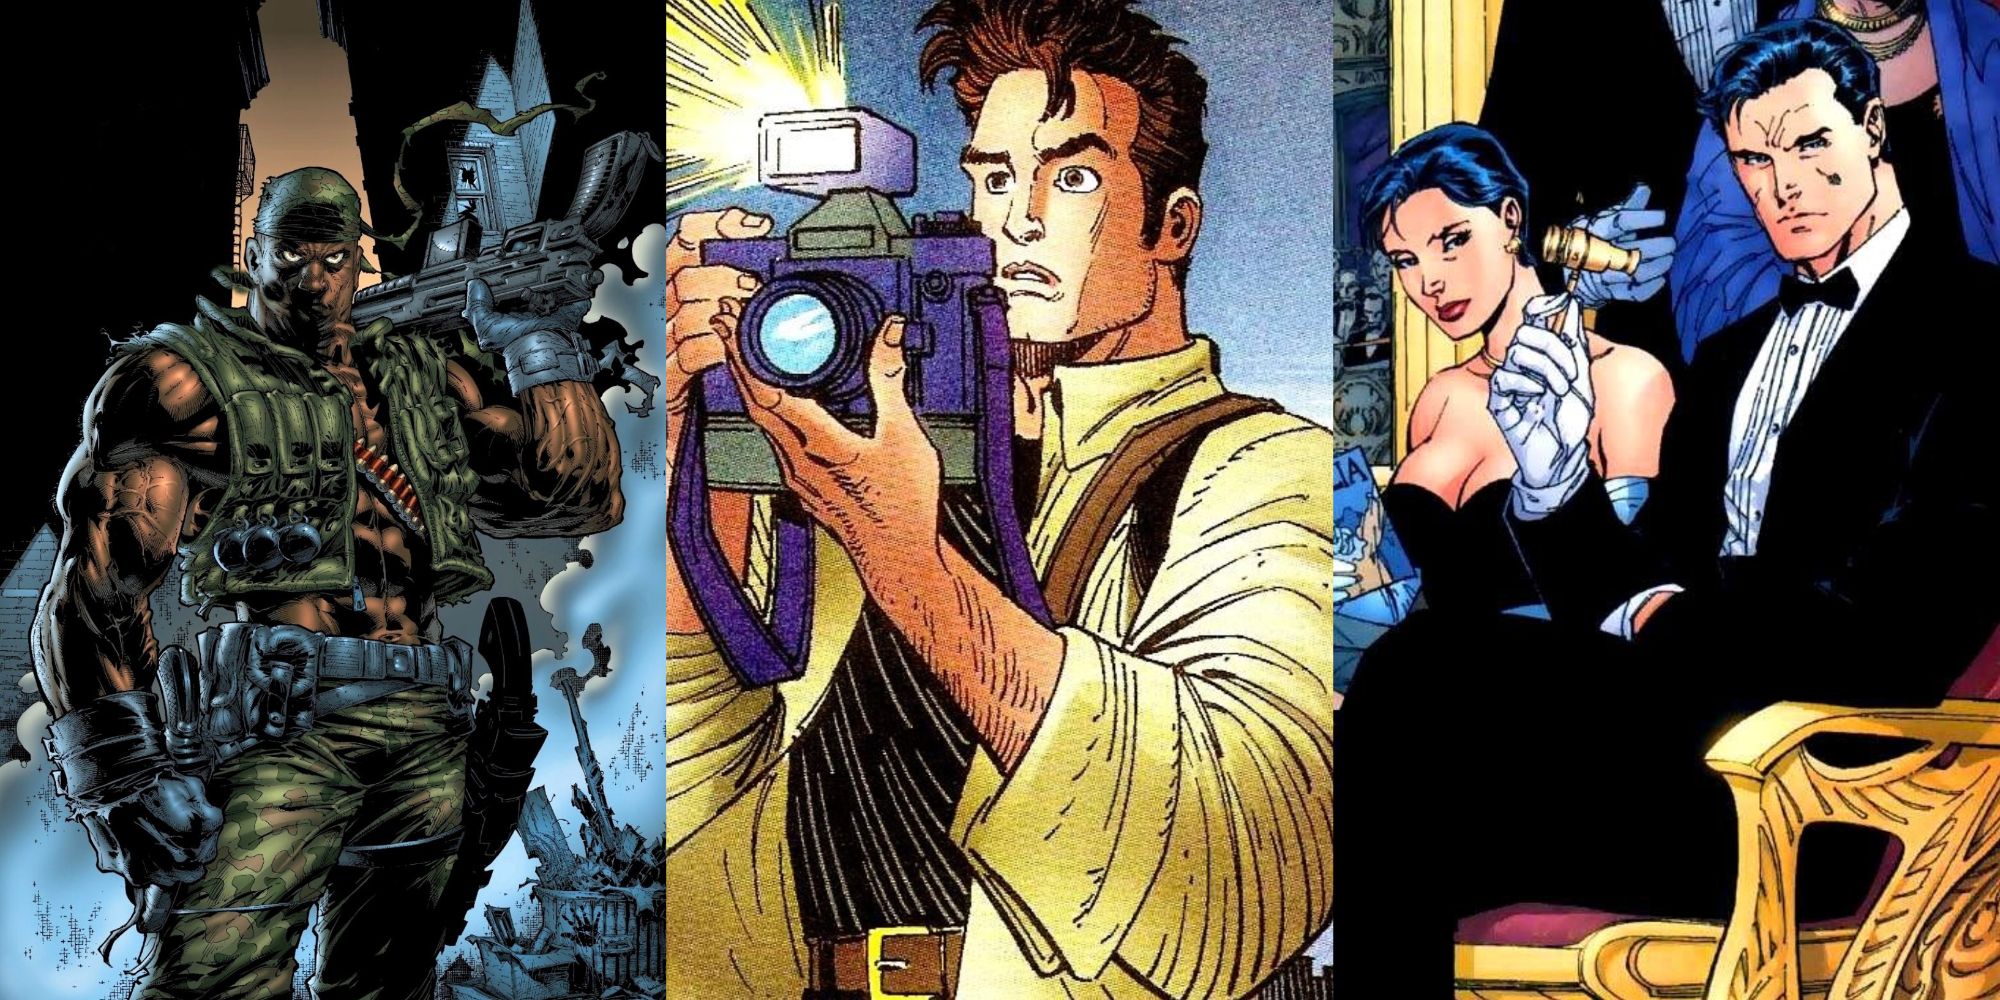 Split image Al Simmons with guns, Peter Parker taking a photo, and Bruce Wayne at an opera